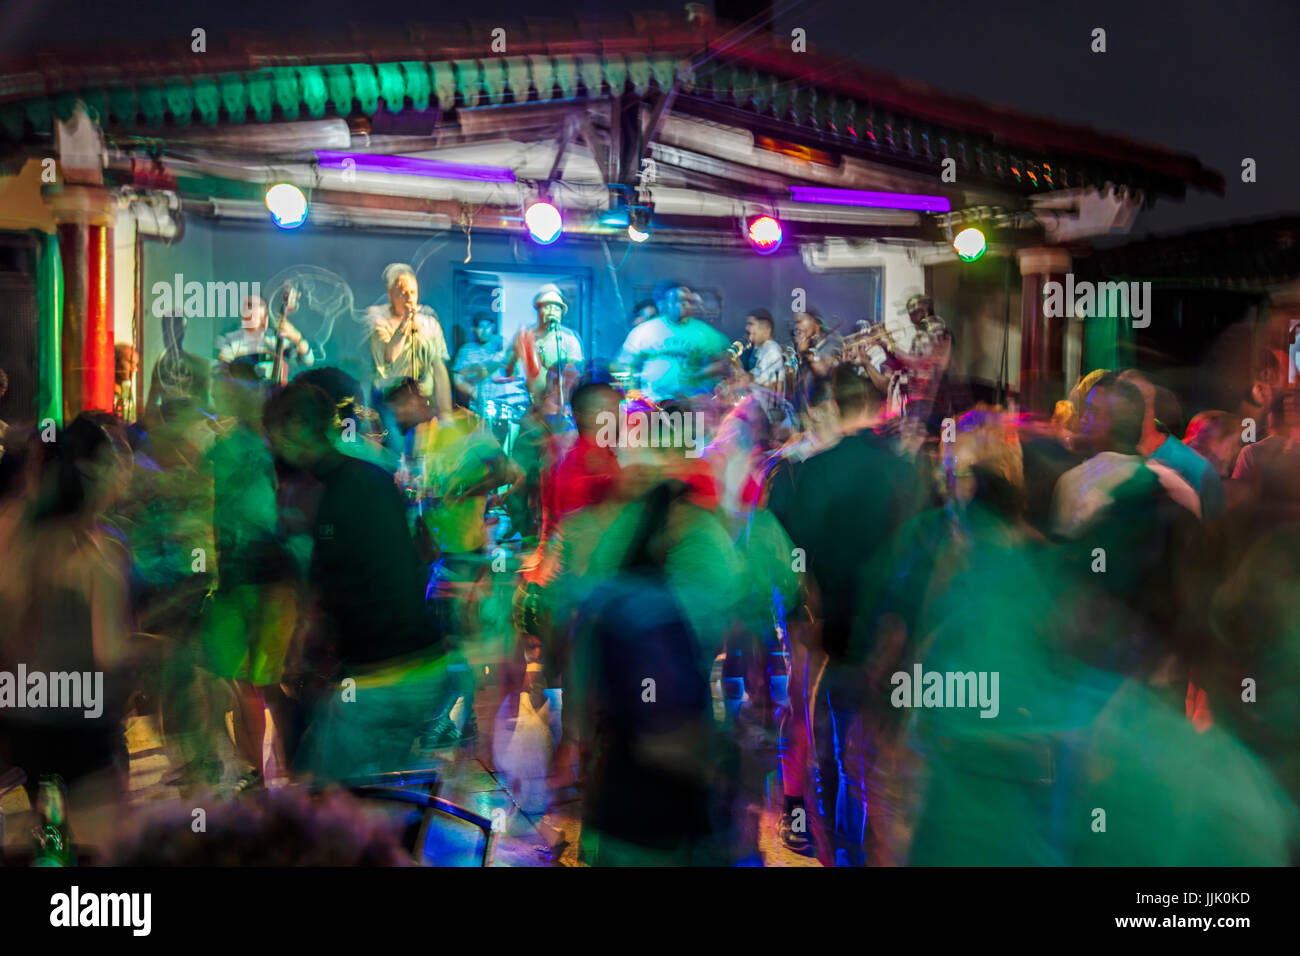 Nightly music and dancing at the Centro Cultural Polo Montanez - VINALES,  PINAR DEL RIO, CUBA Stock Photo - Alamy